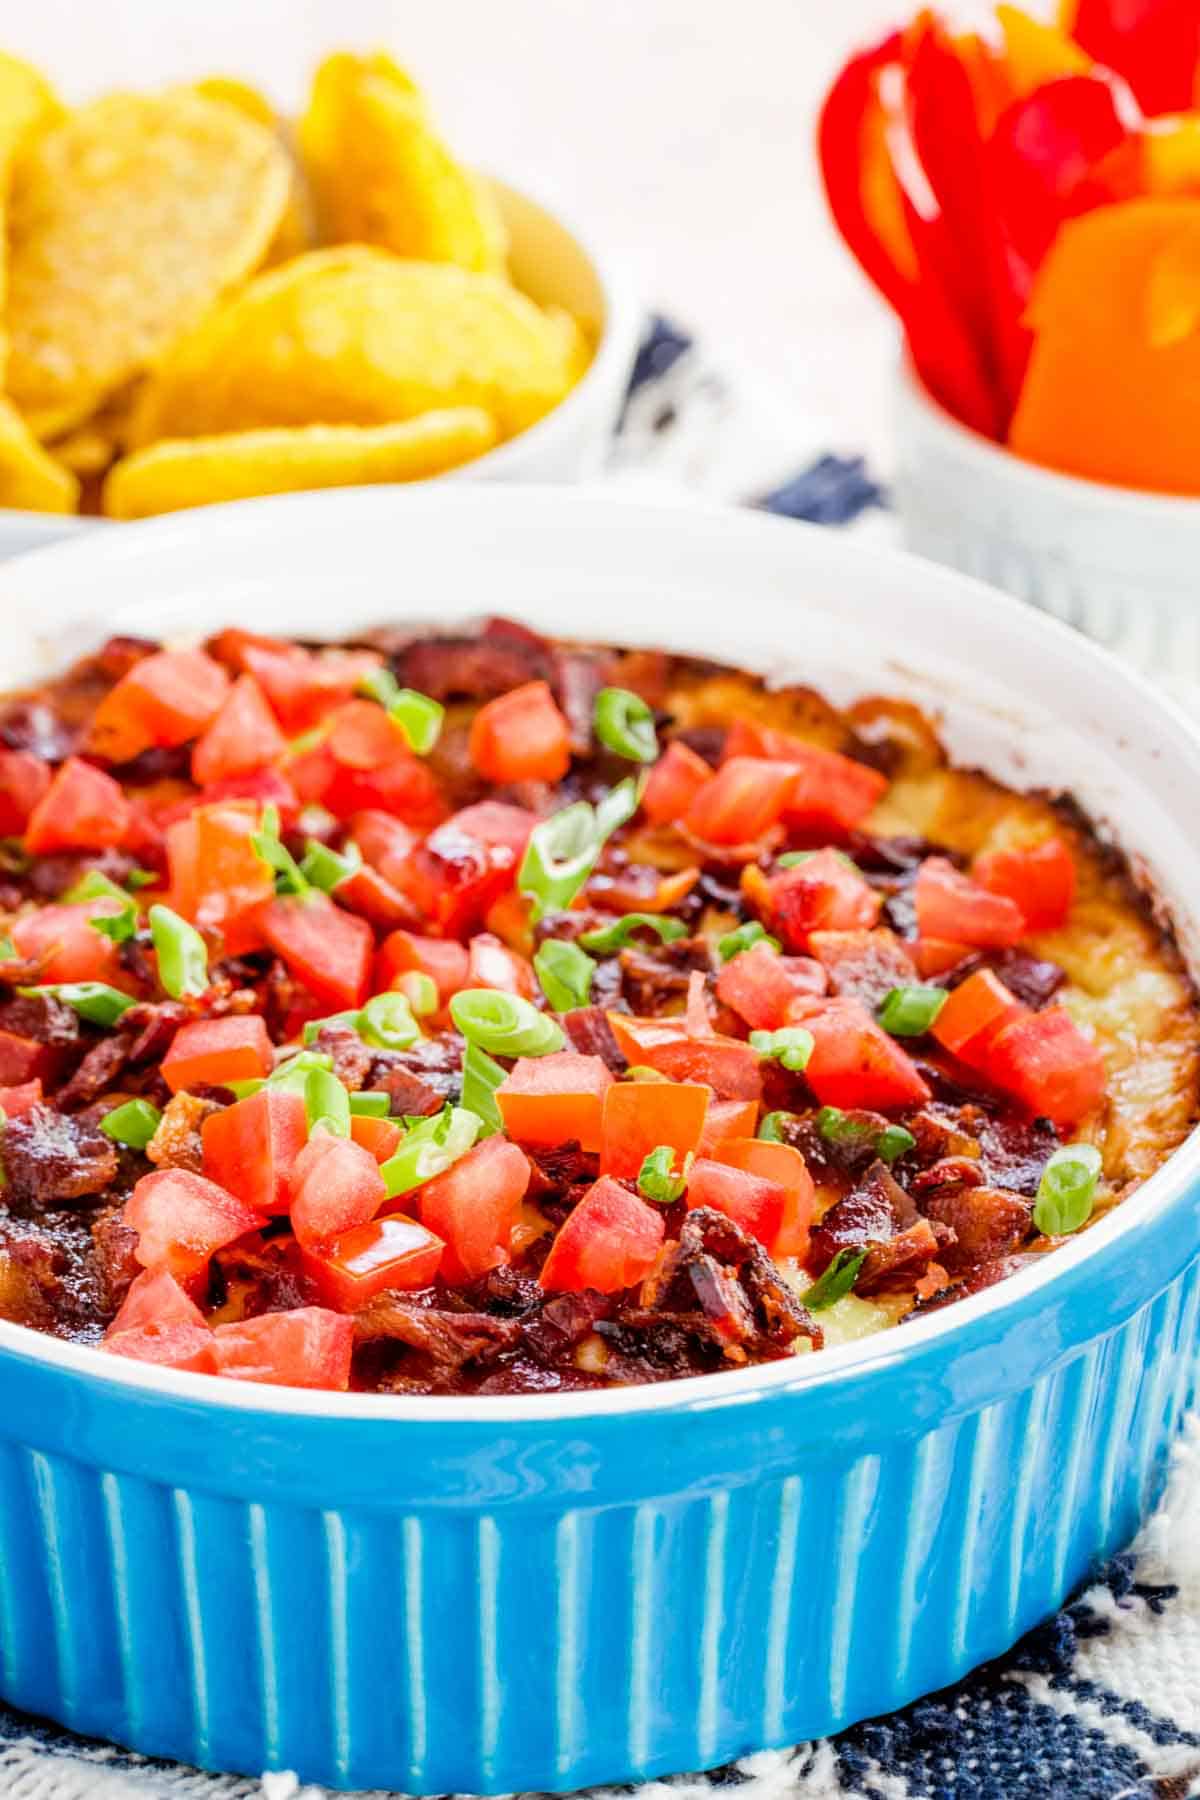 A baked dip topped with bacon and tomatoes with bowls of tortilla chips and pepepr slices.